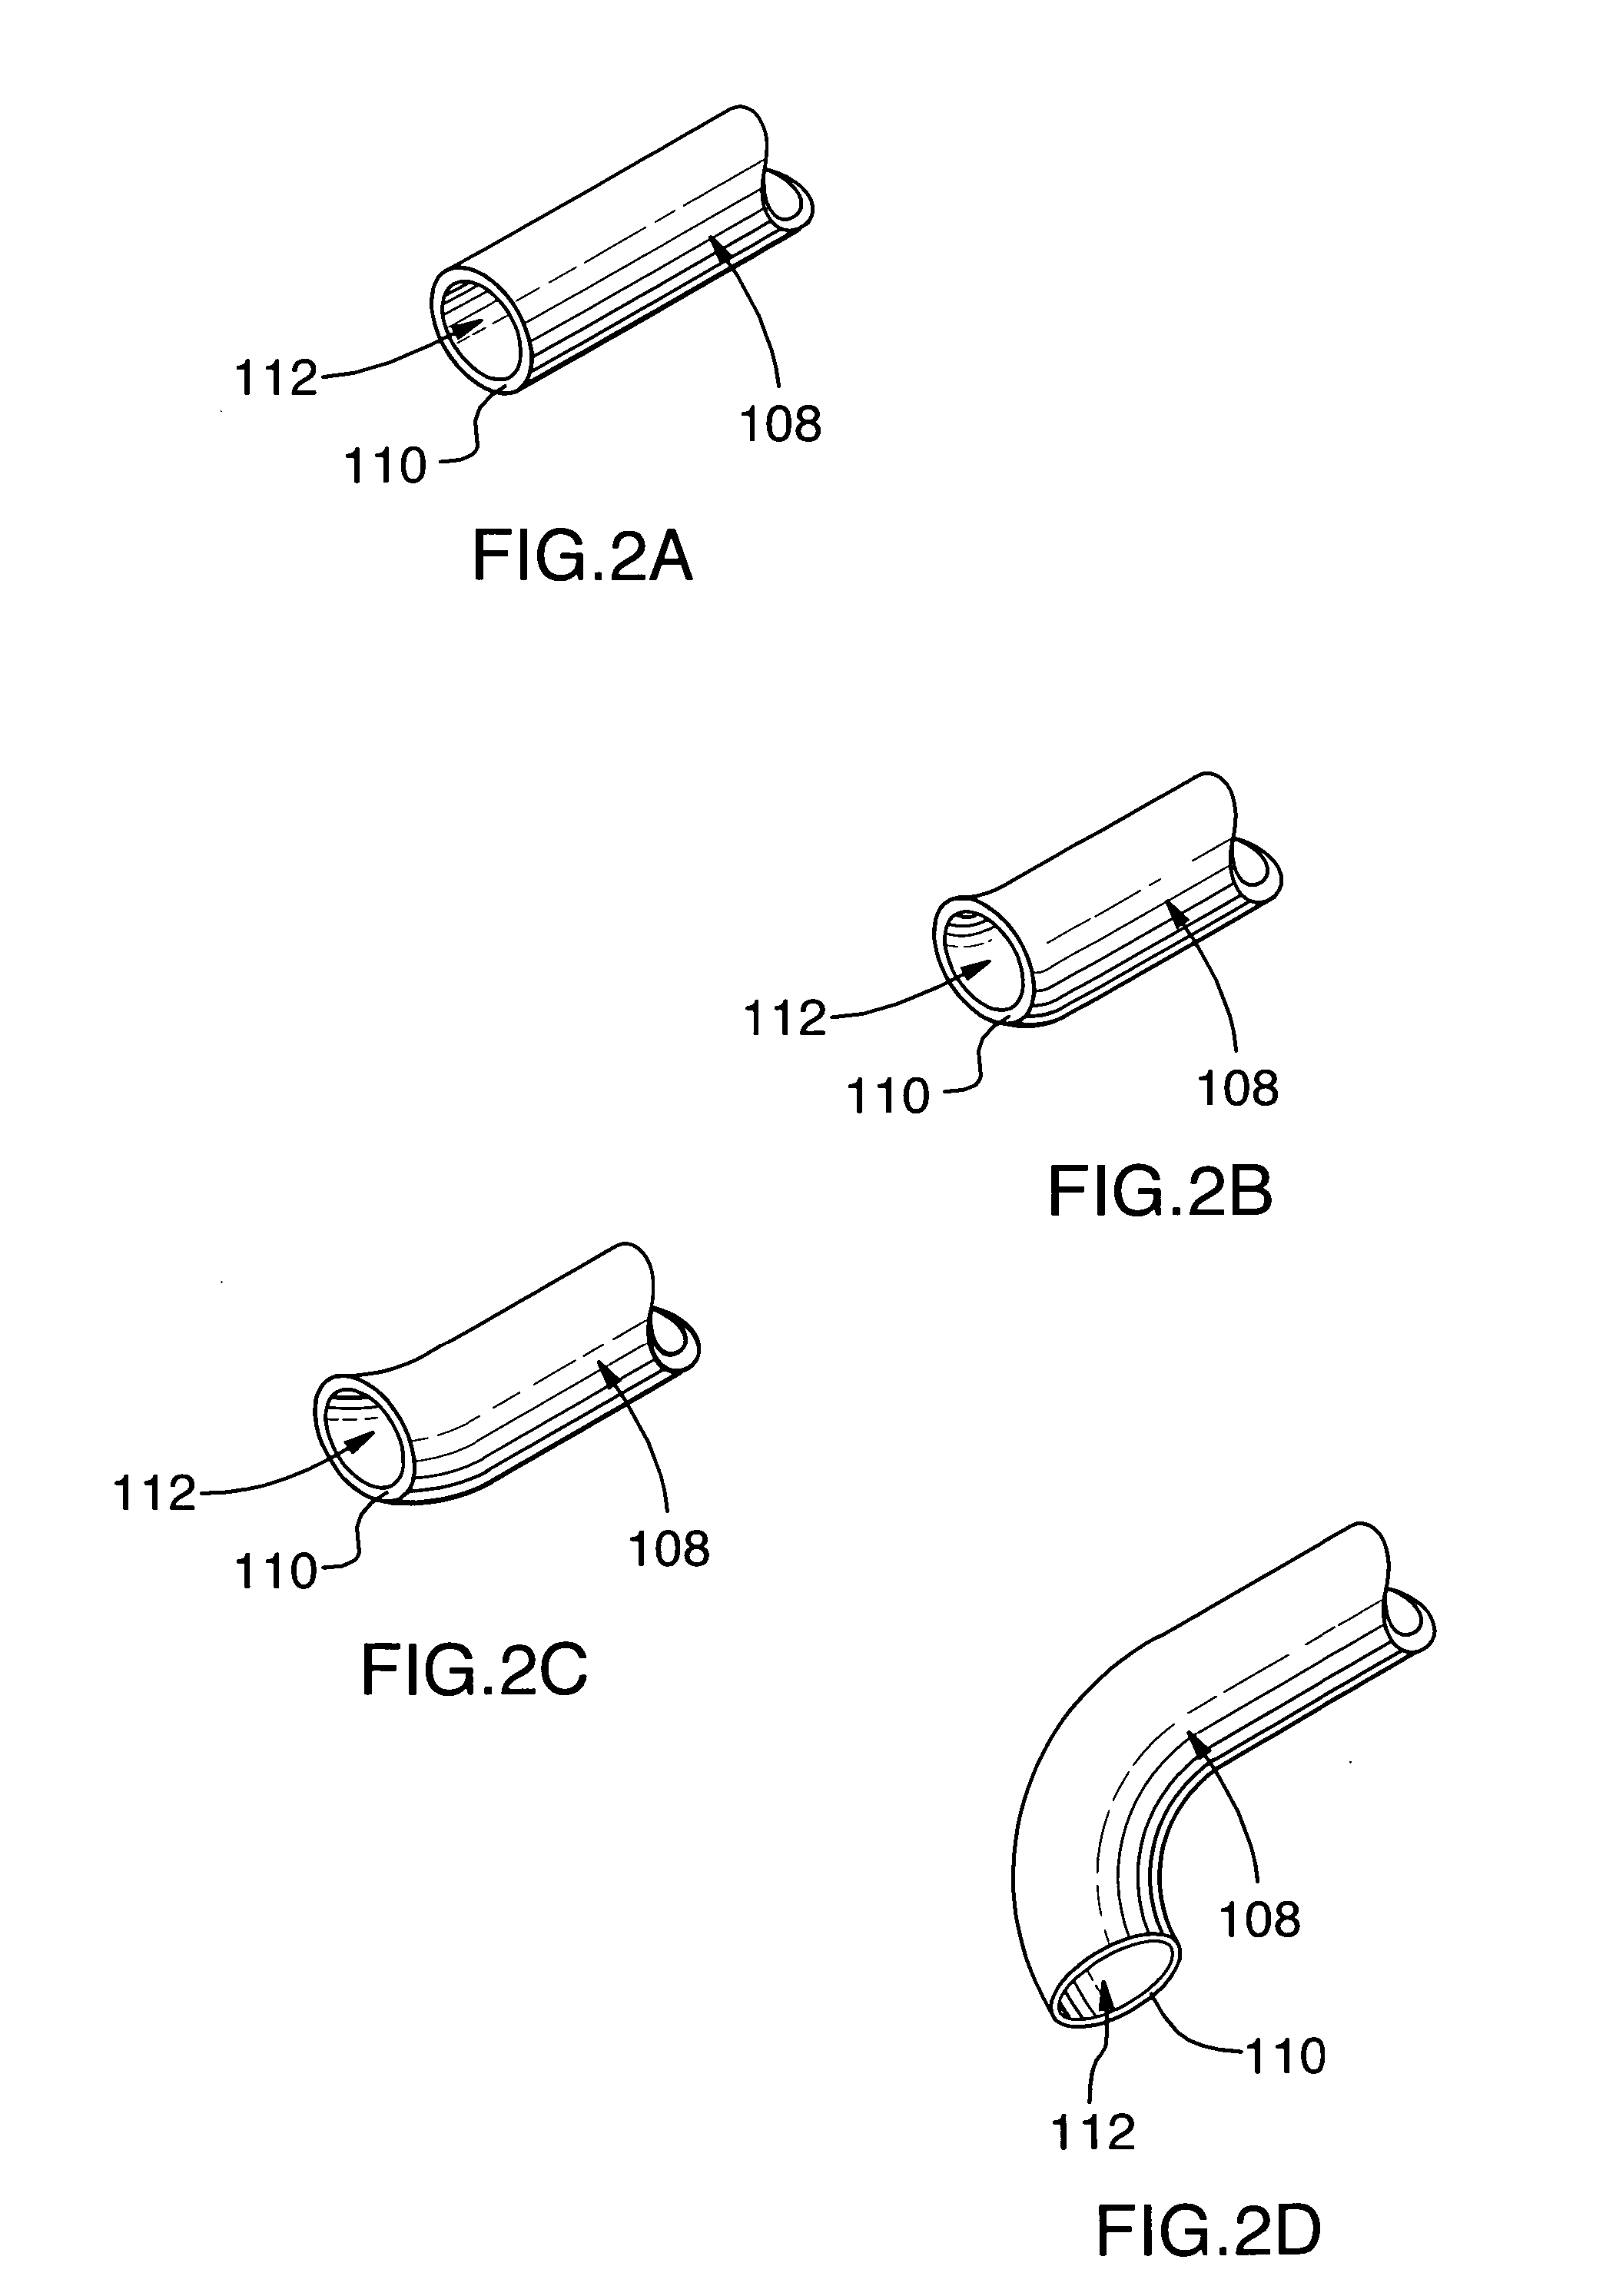 Method for removing material from a patient's body